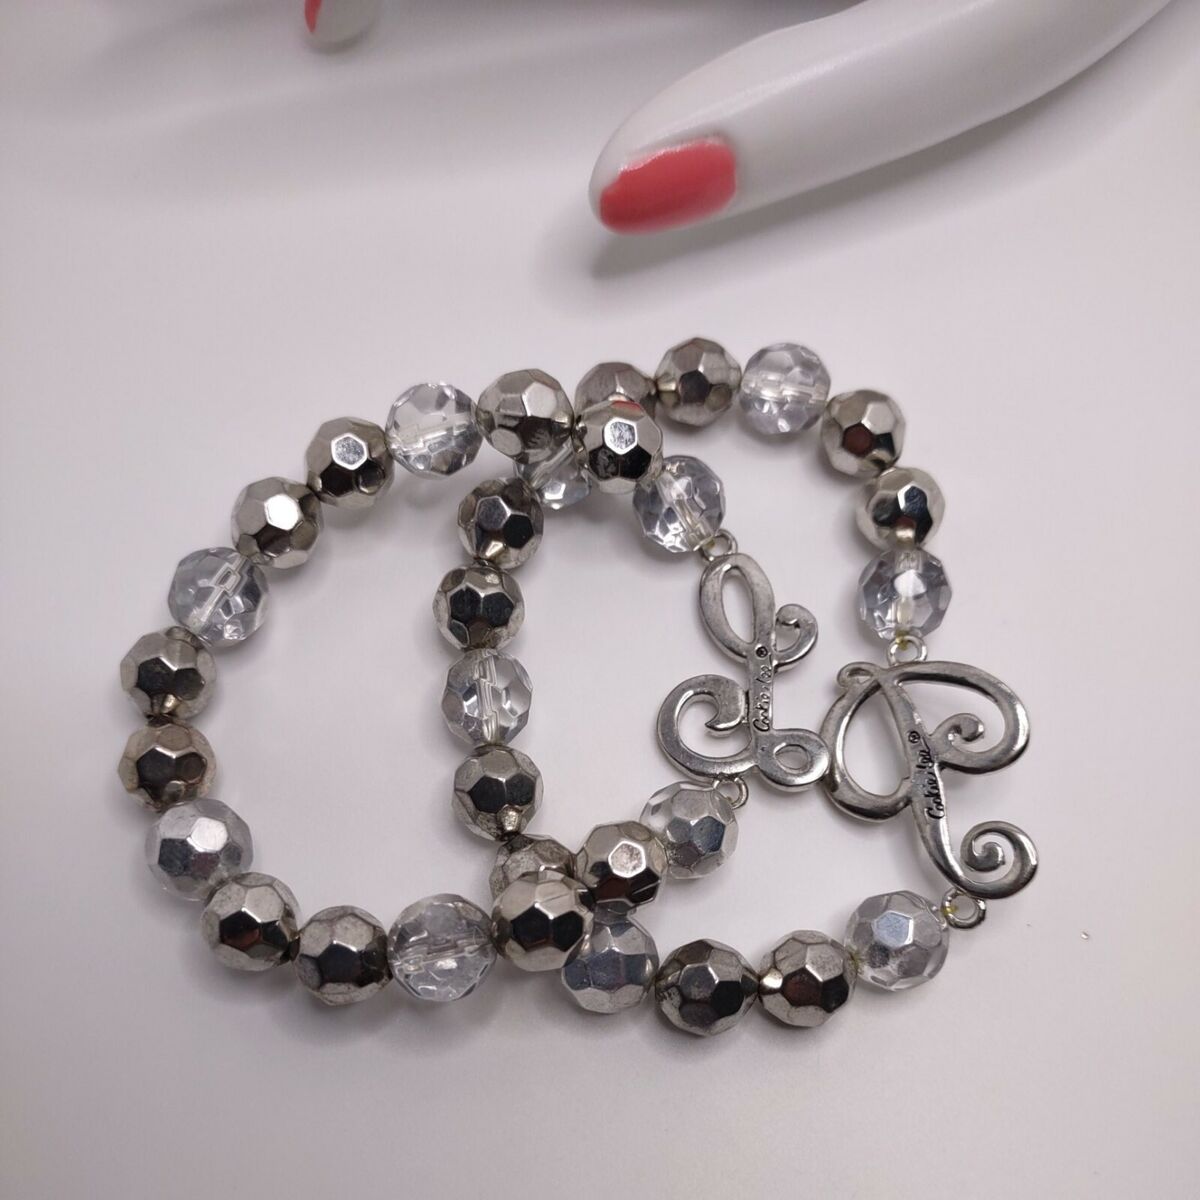 COOKIE LEE 2 Stretch Bracelet Letters P & L Gray Clear Glass Beads.  4505